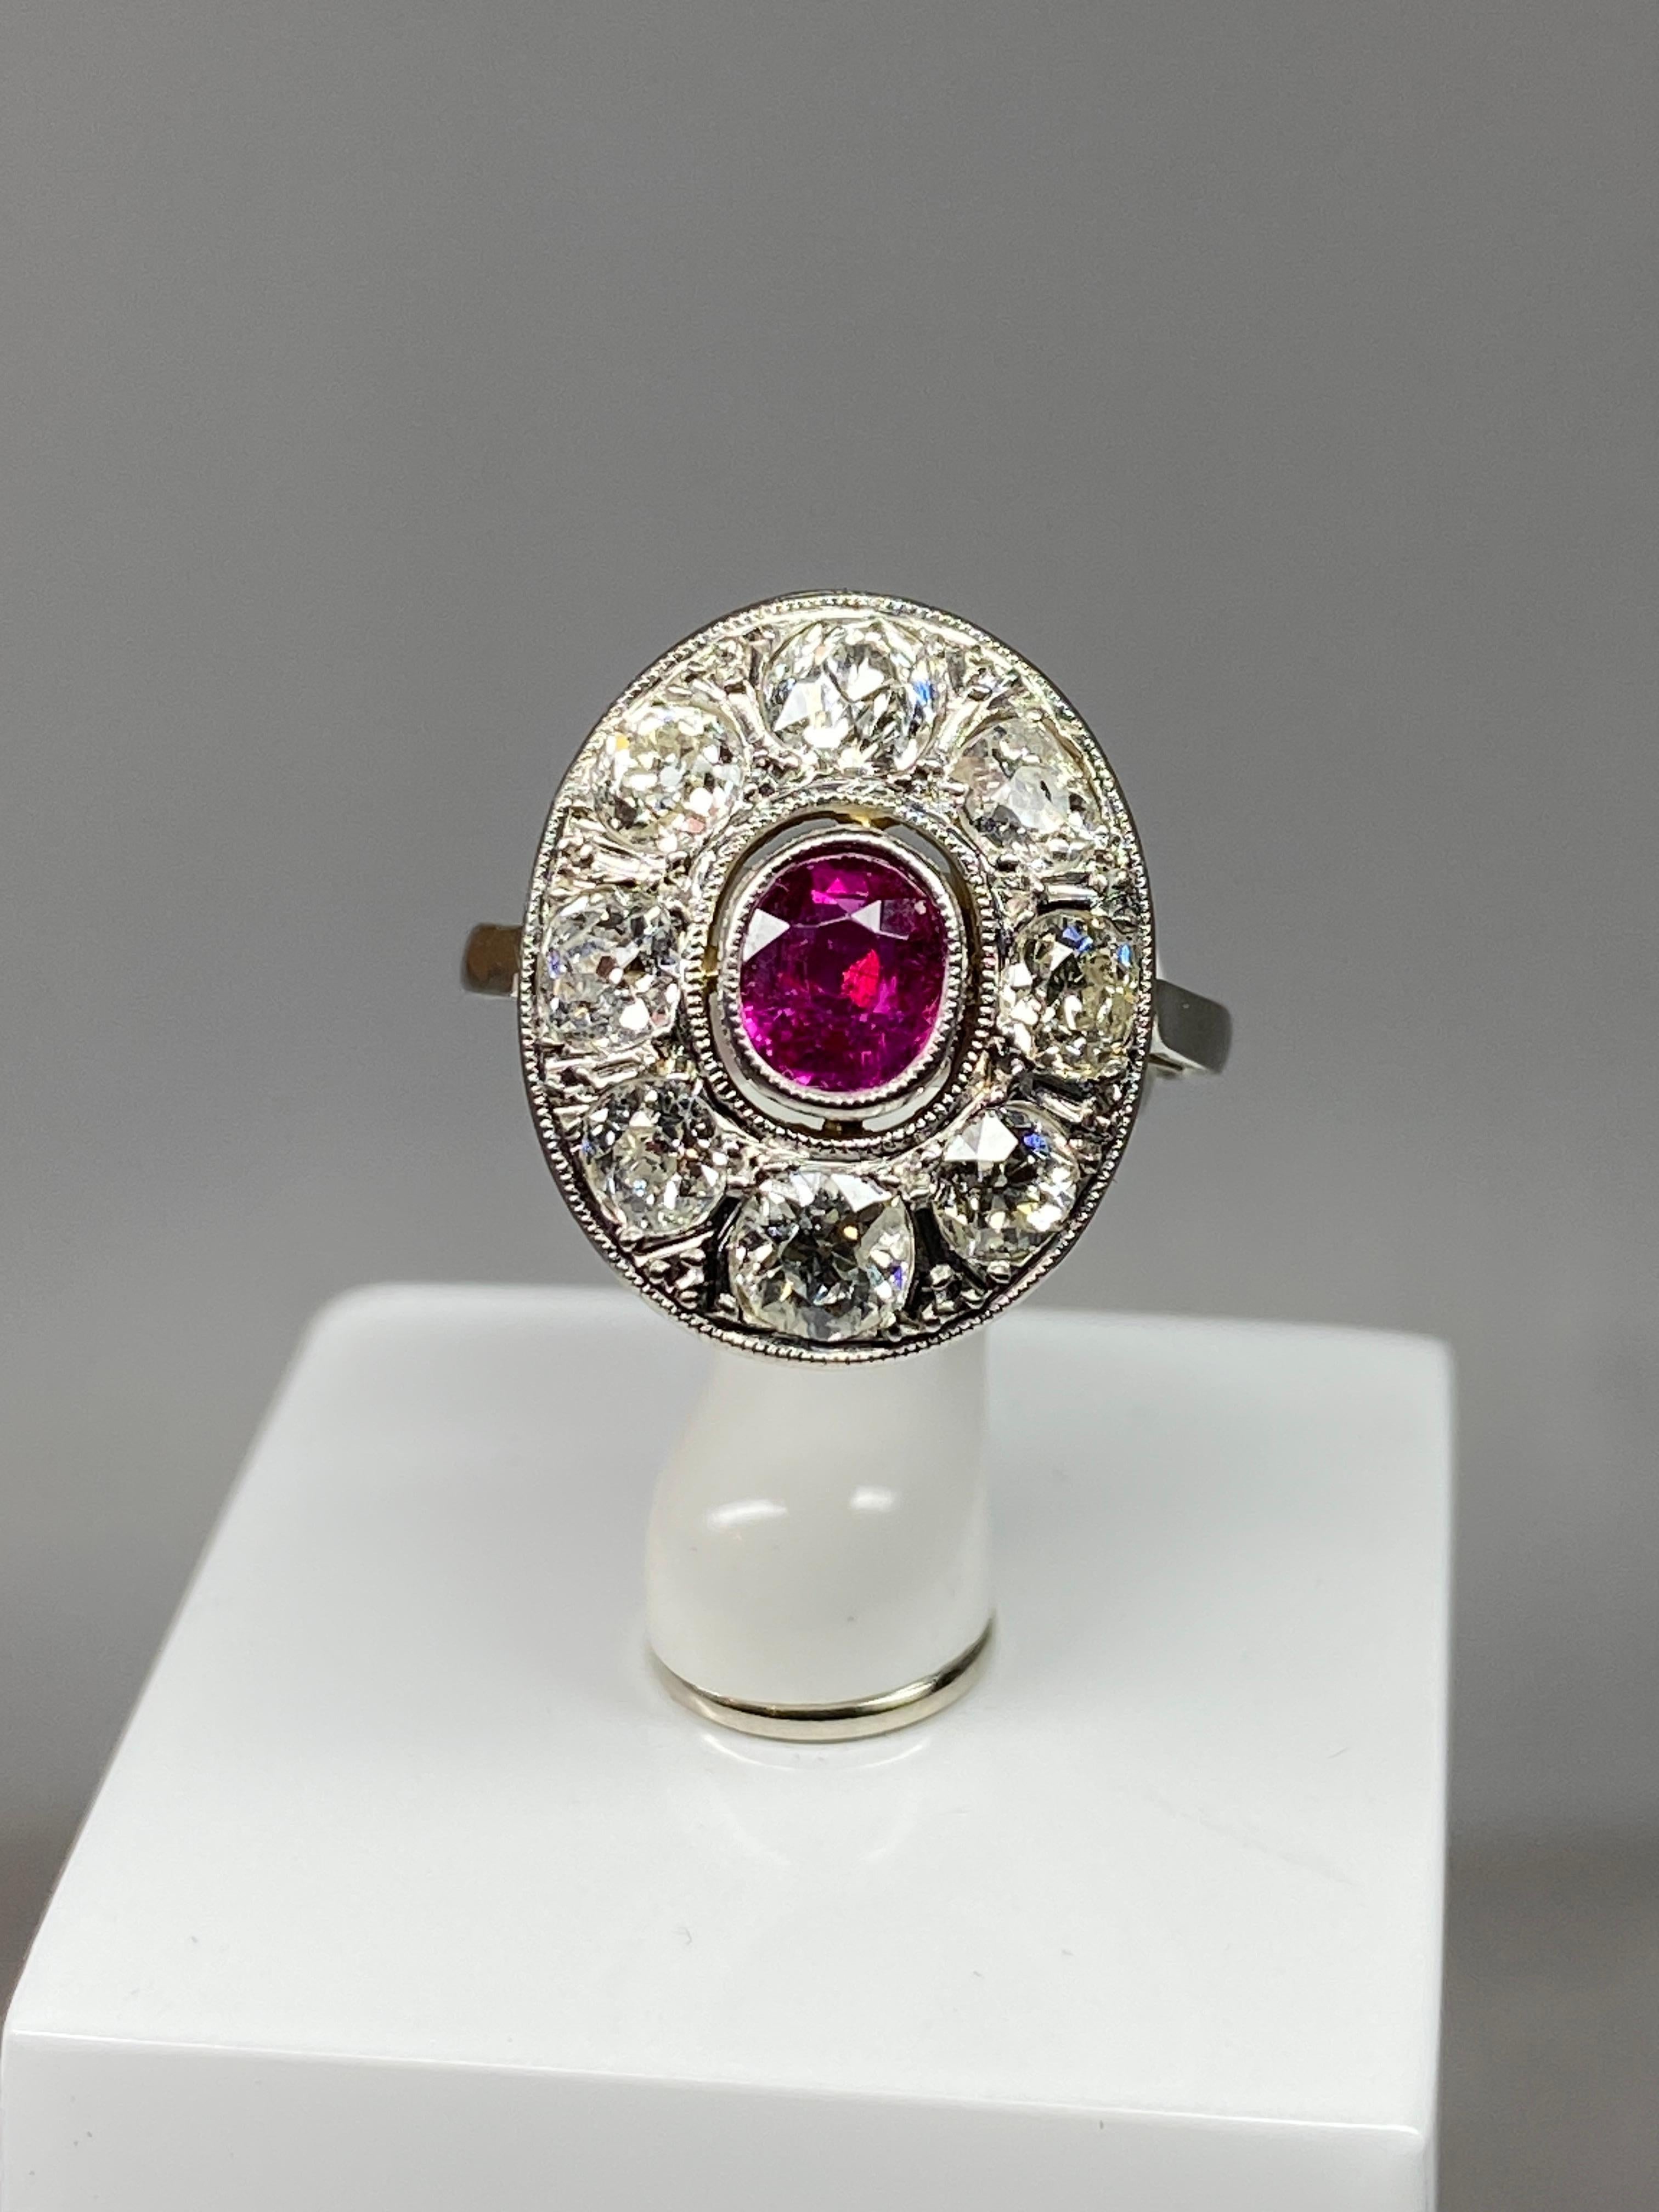 Romantic Oval Ring in 18 Carat Gold Set with a Ruby and Diamonds, 1900 Period For Sale